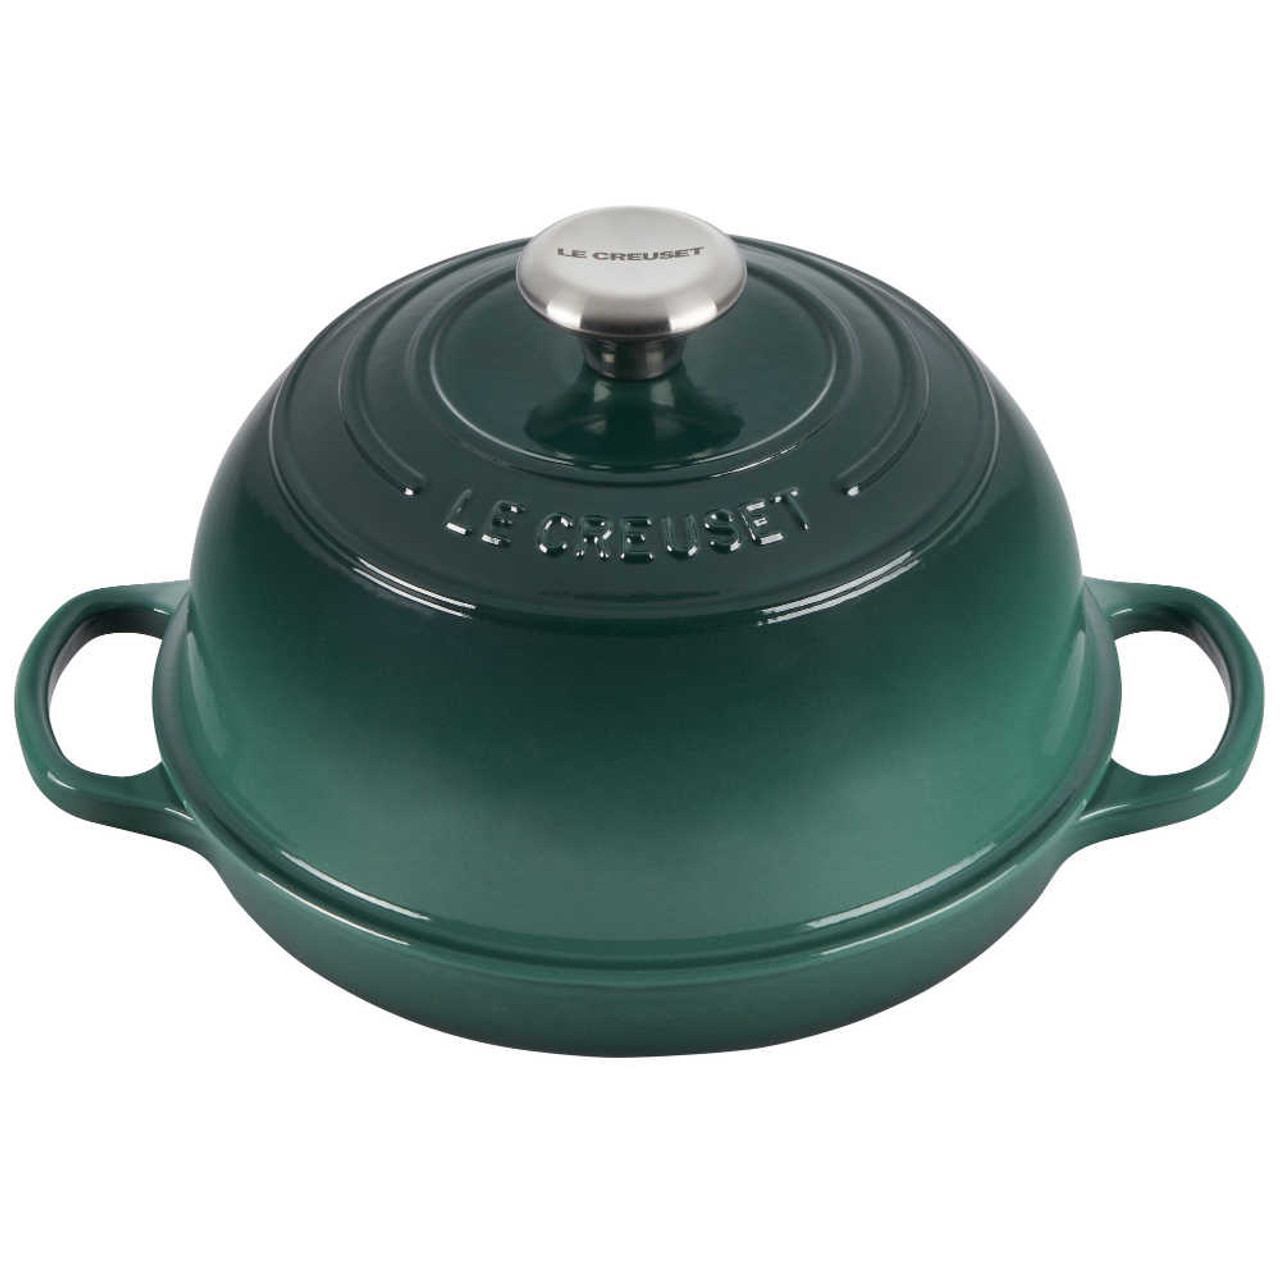 https://cdn11.bigcommerce.com/s-hccytny0od/images/stencil/1280x1280/products/5131/22077/Le_Creuset_Cast_Iron_Bread_Oven_in_Artichaut__21567.1666741877.jpg?c=2?imbypass=on